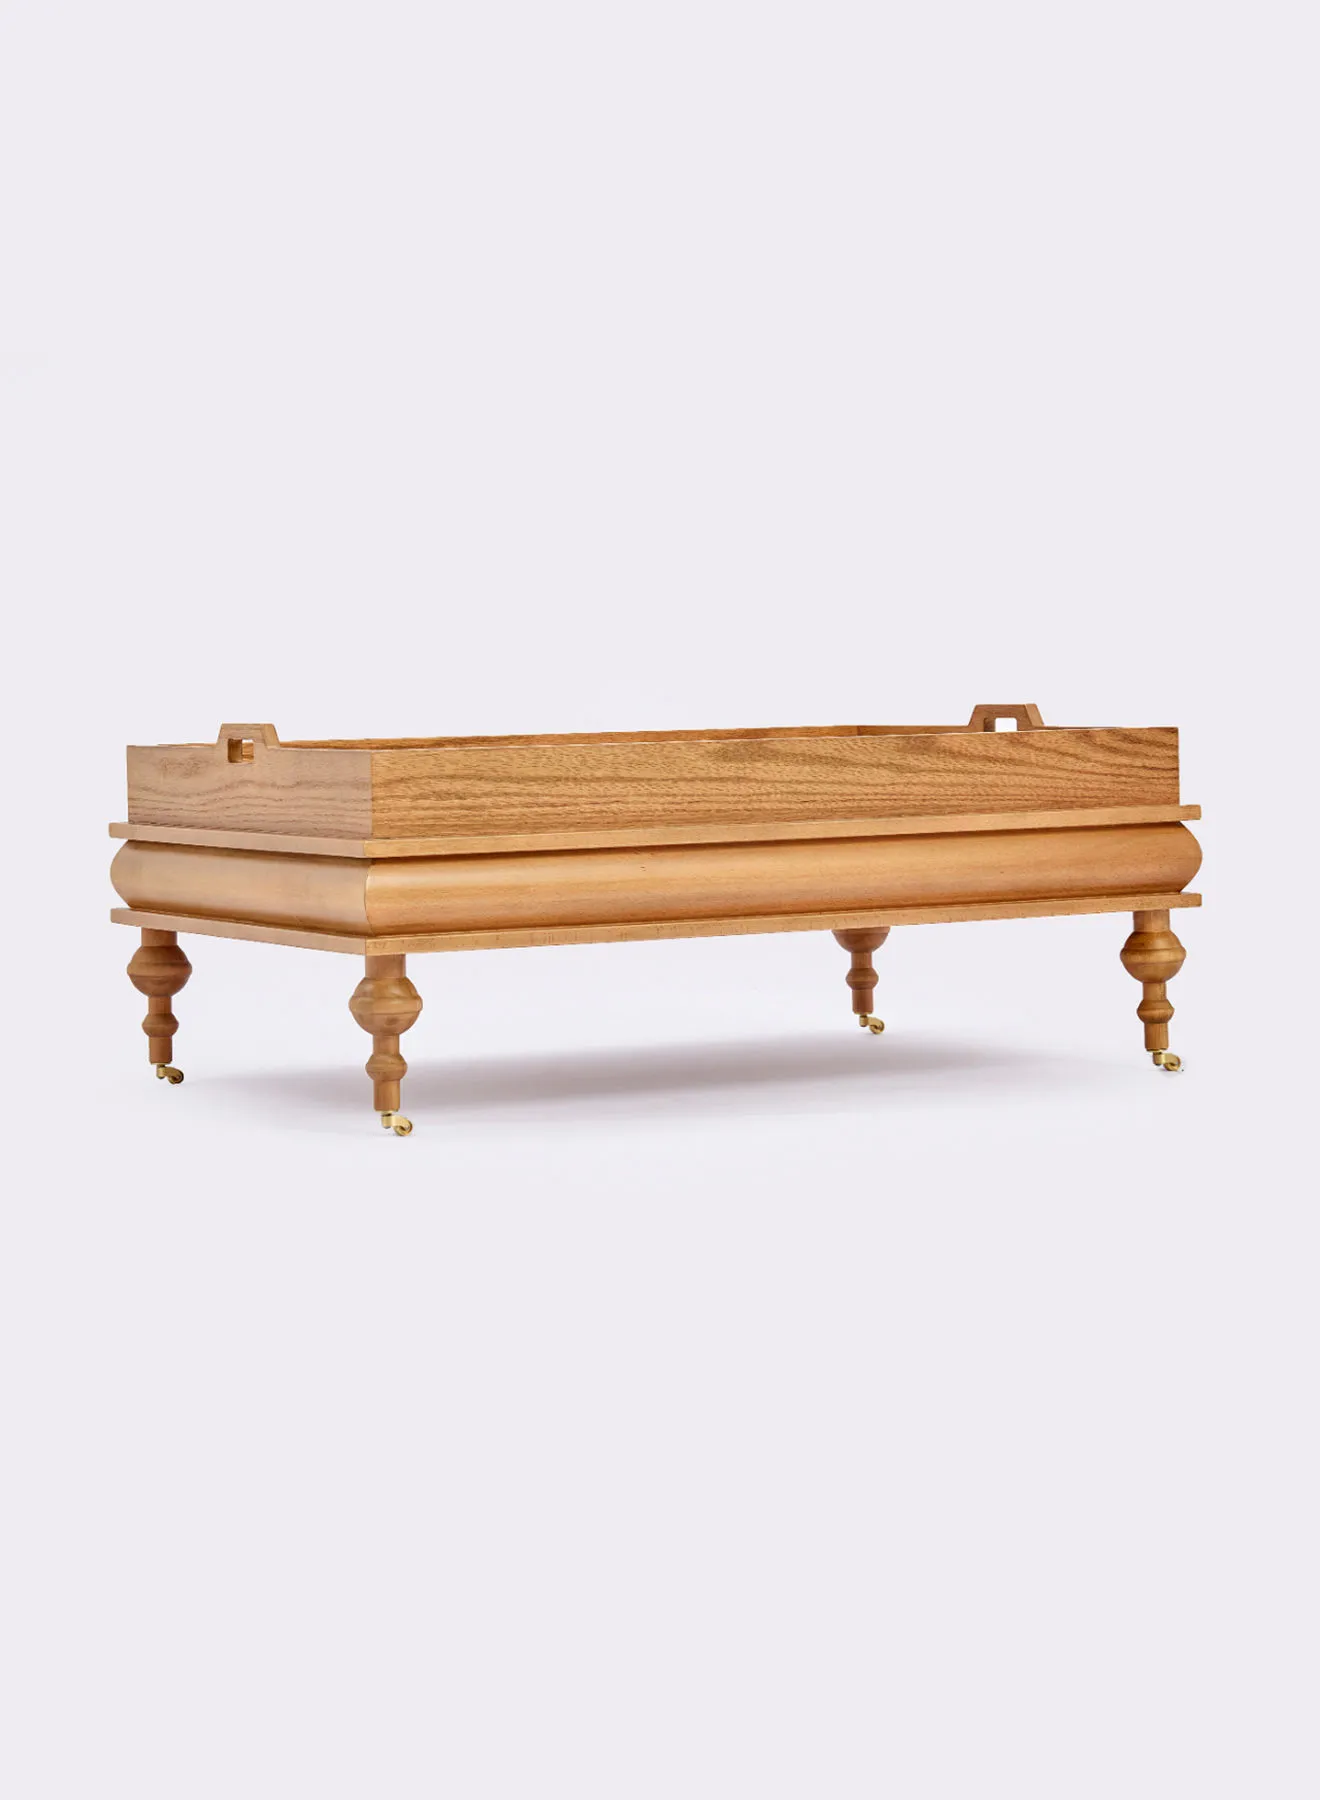 ebb & flow Coffee Table Luxurious -Used As Coffee Corner In Brown Wood - Size 1200 X 800 X 480